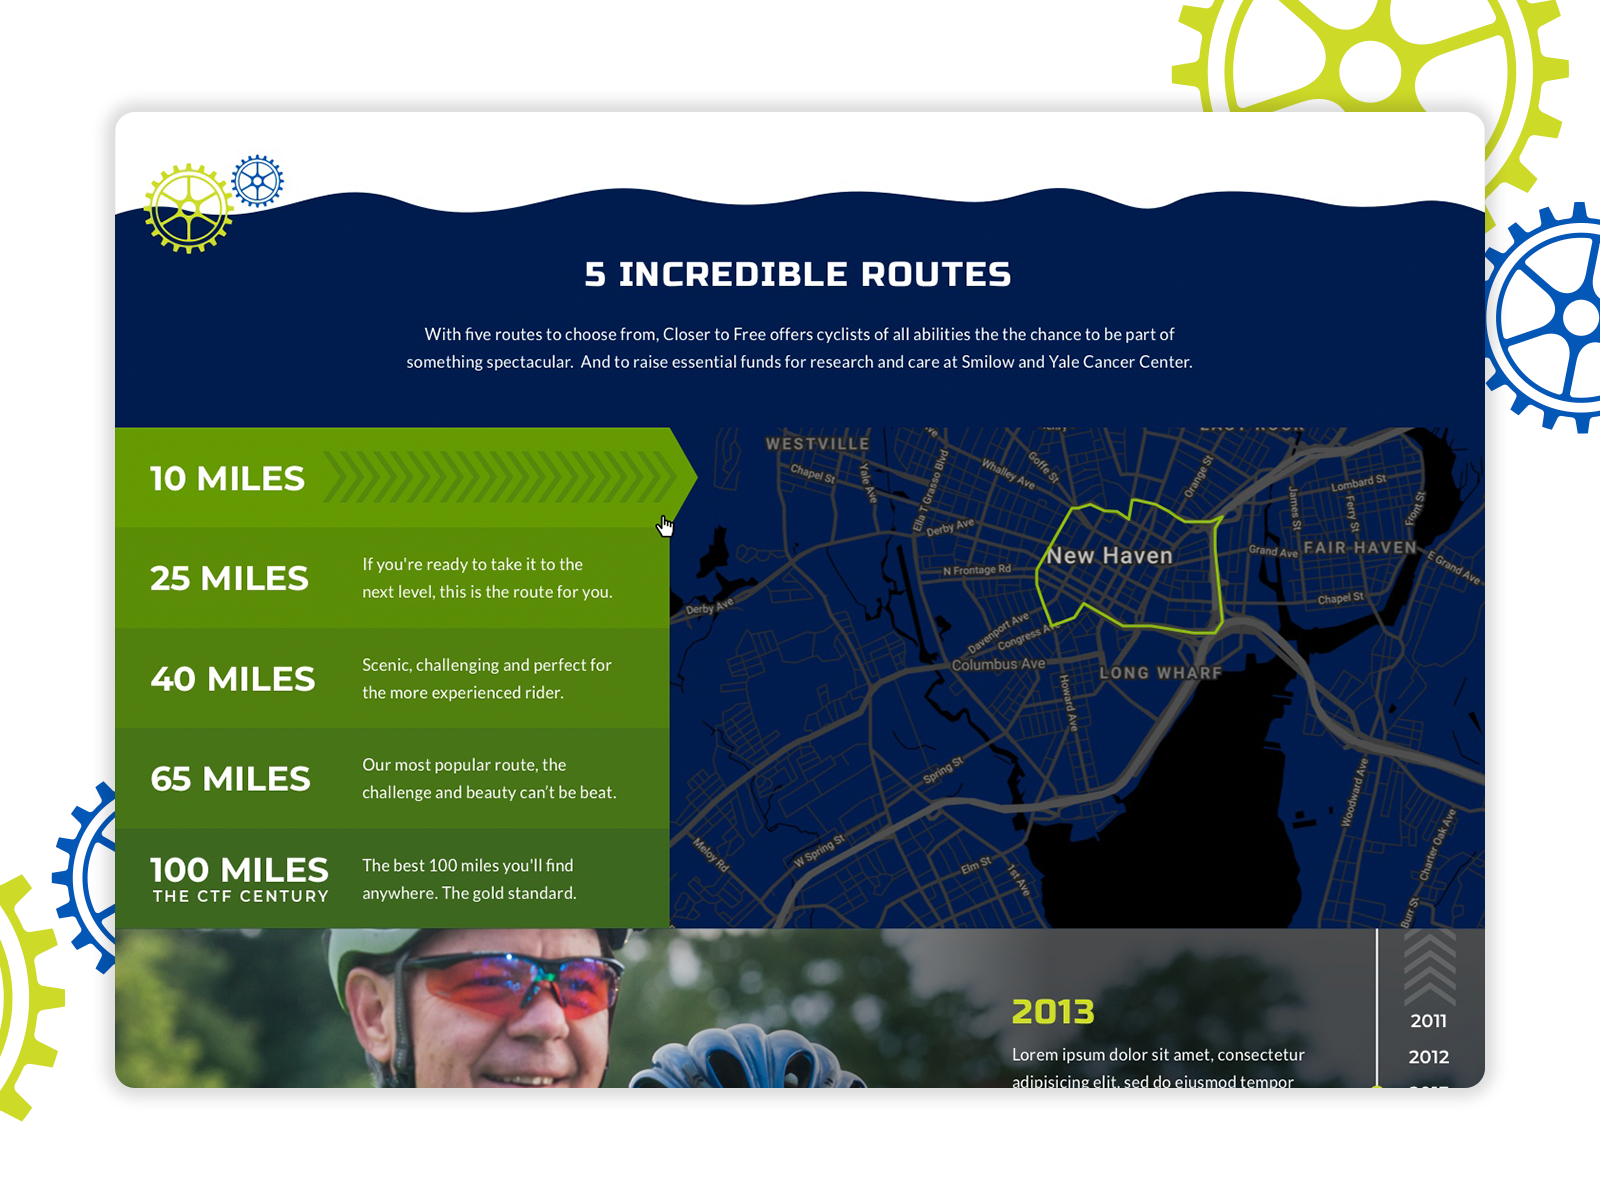 Closer to Free Ride Interactive Route Map by Holly Underwood on Dribbble